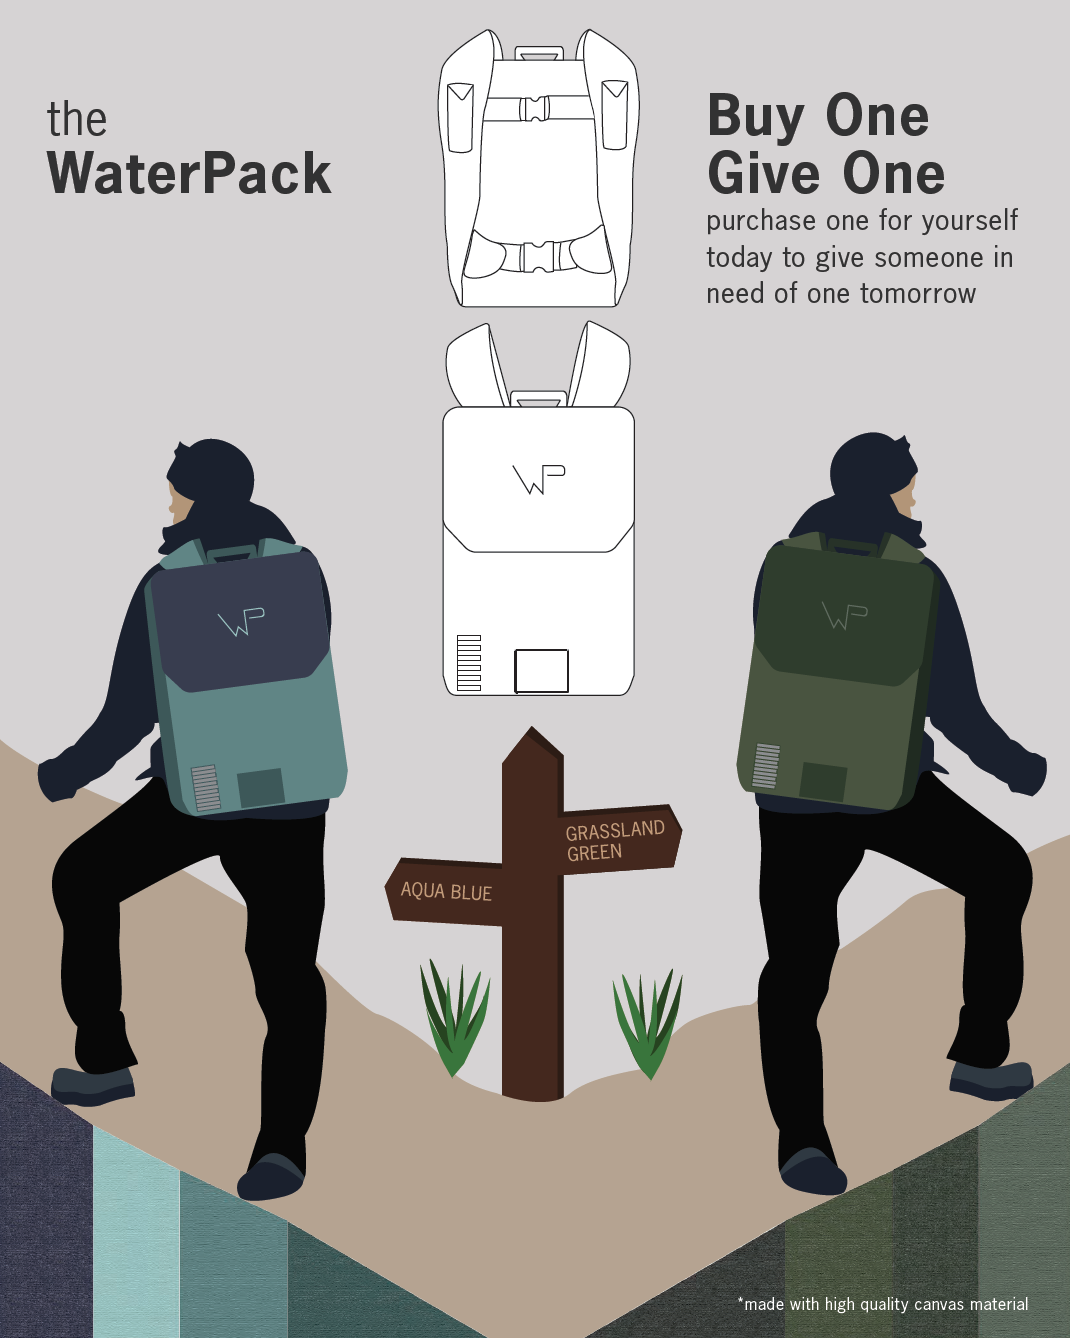 The WaterPack